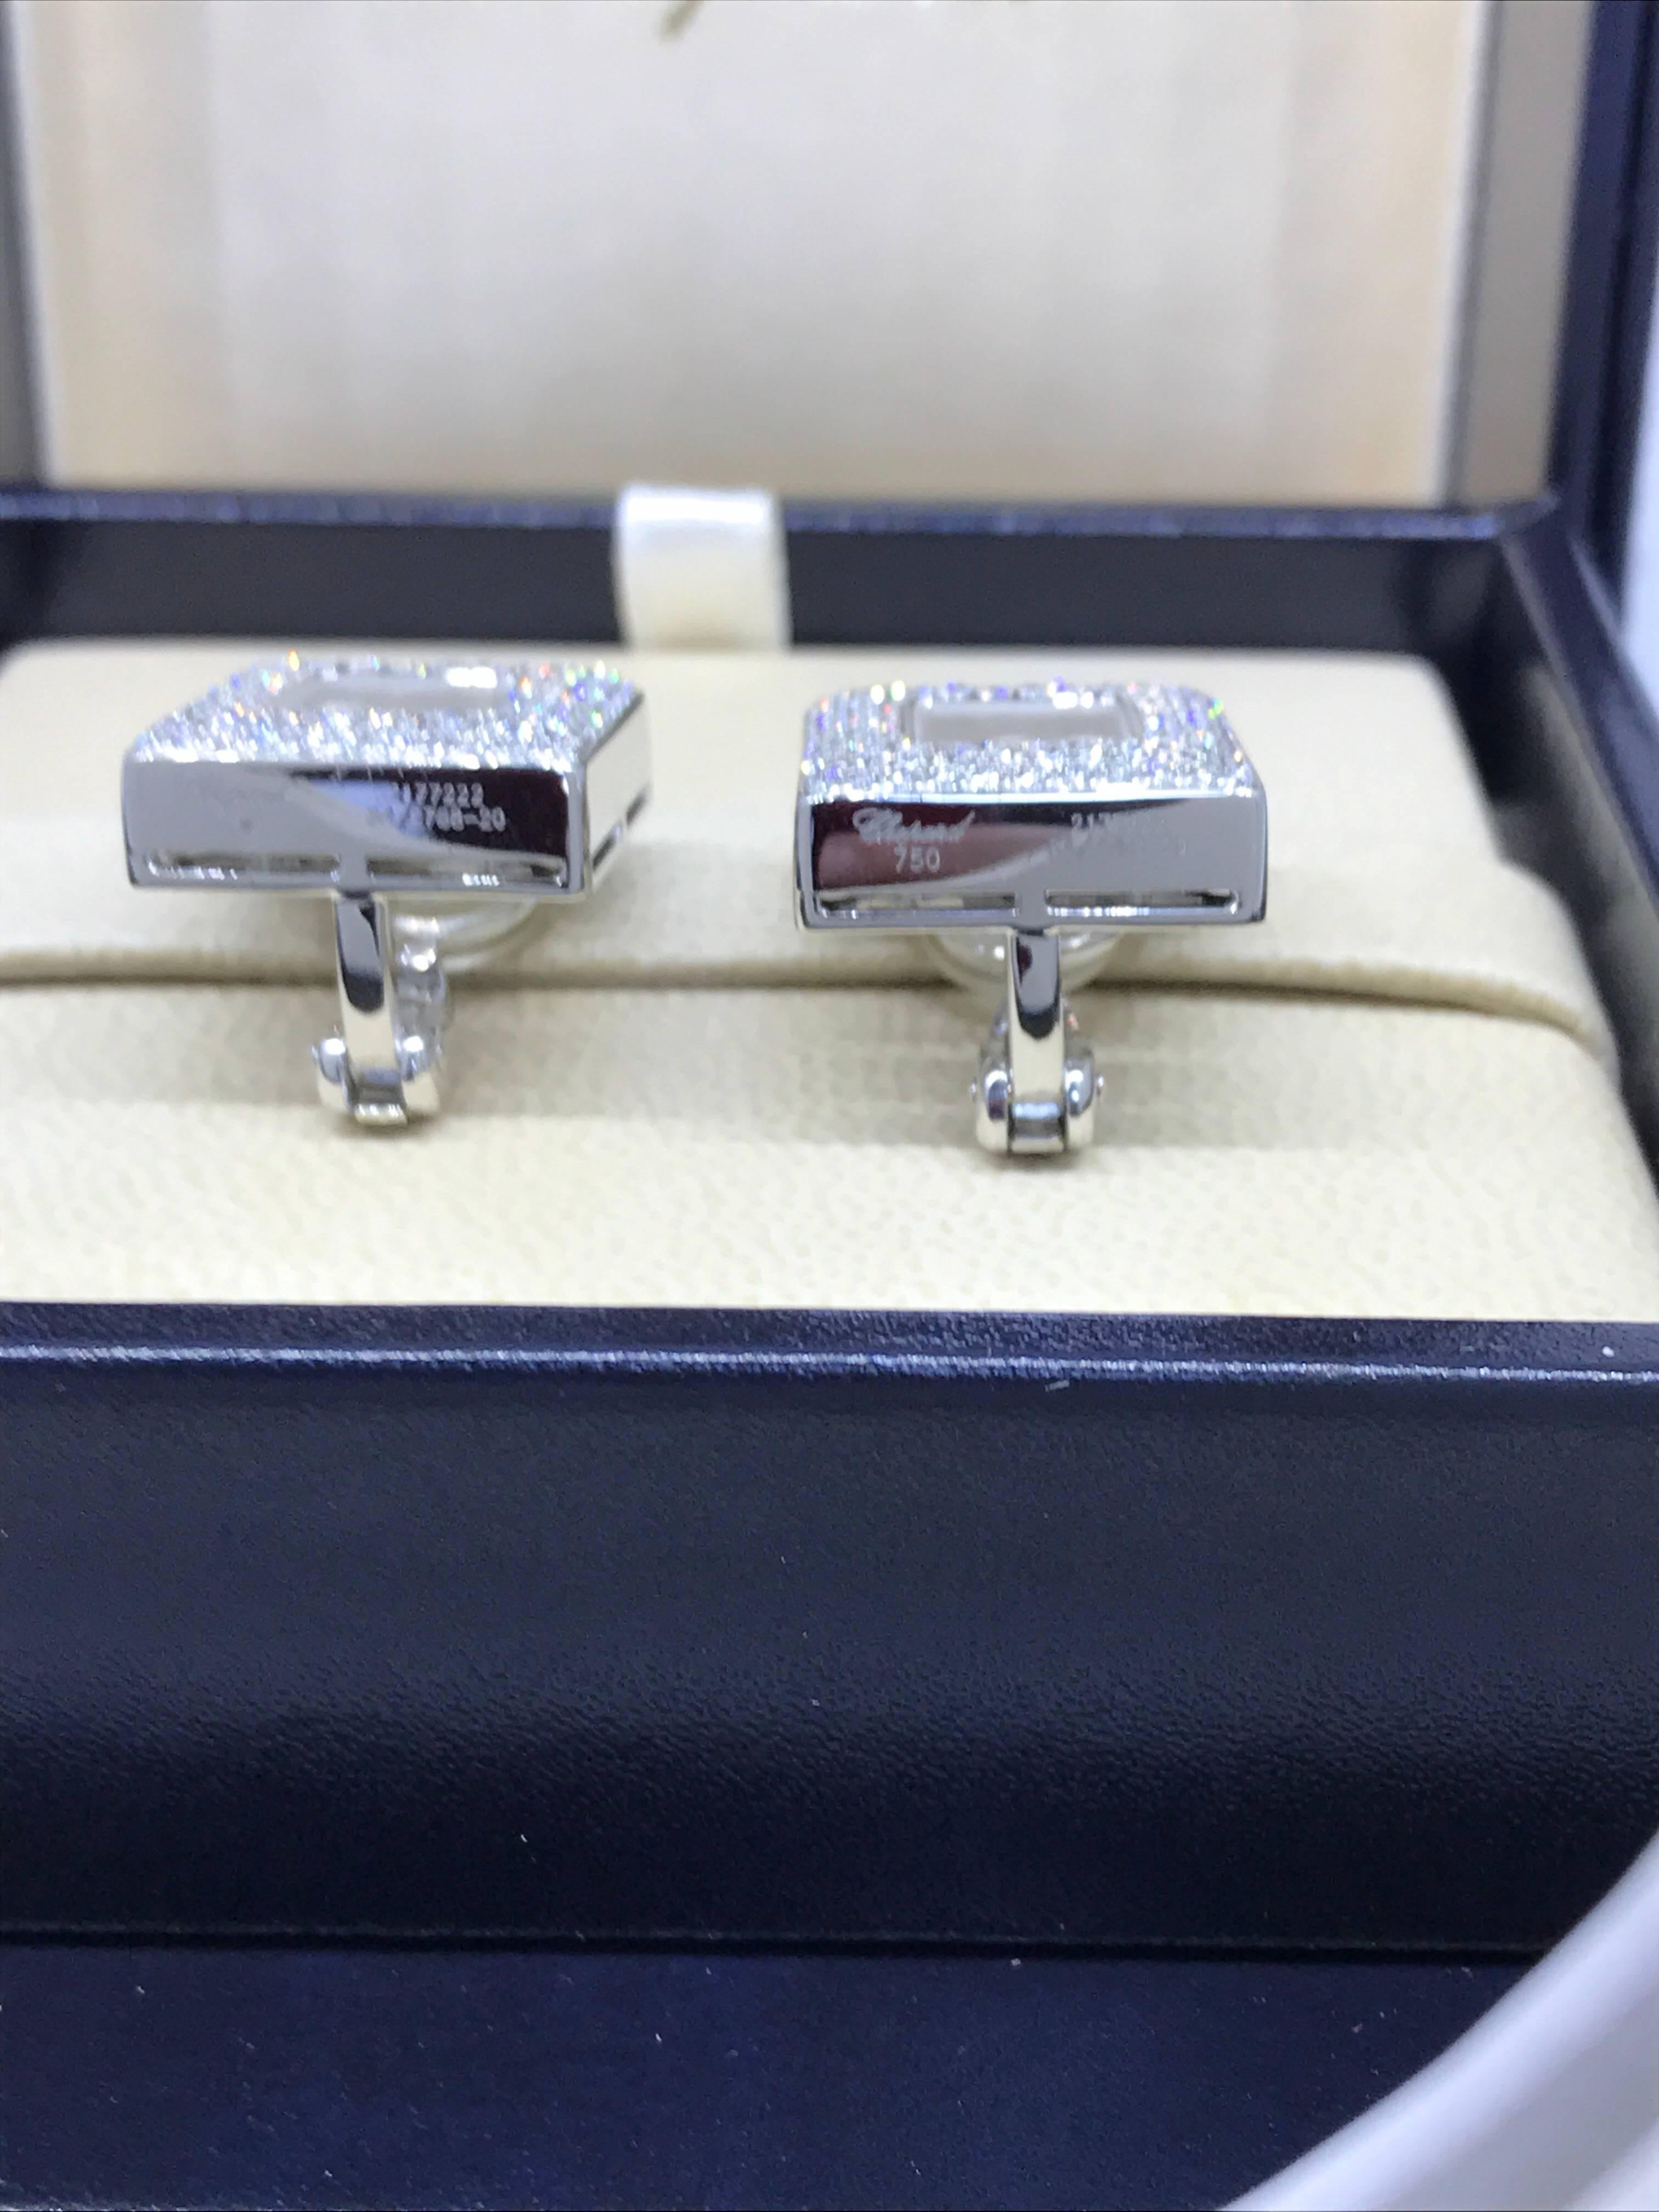 Chopard Happy Diamonds Square Earrings

Model number 84/2768-20

100% Authentic

New / Old Stock

Comes with original Chopard box, certificate of authenticity and warranty and jewels manual

18 Karat White Gold

Clip-On Style

200 Diamonds on the